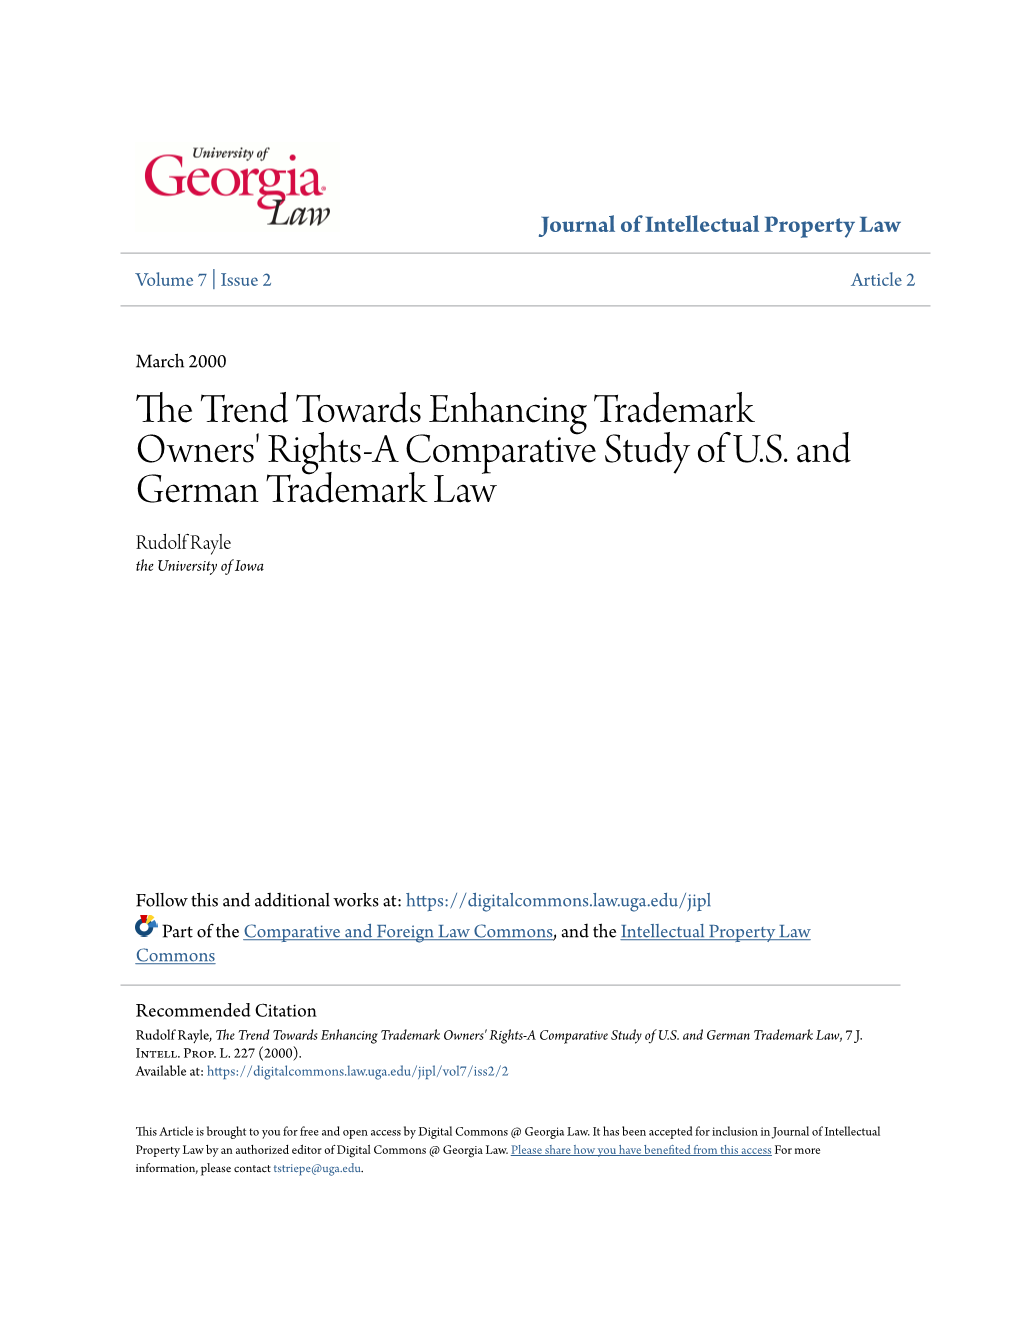 The Trend Towards Enhancing Trademark Owners' Rights-A Comparative Study of U.S. and German Trademark Law, 7 J